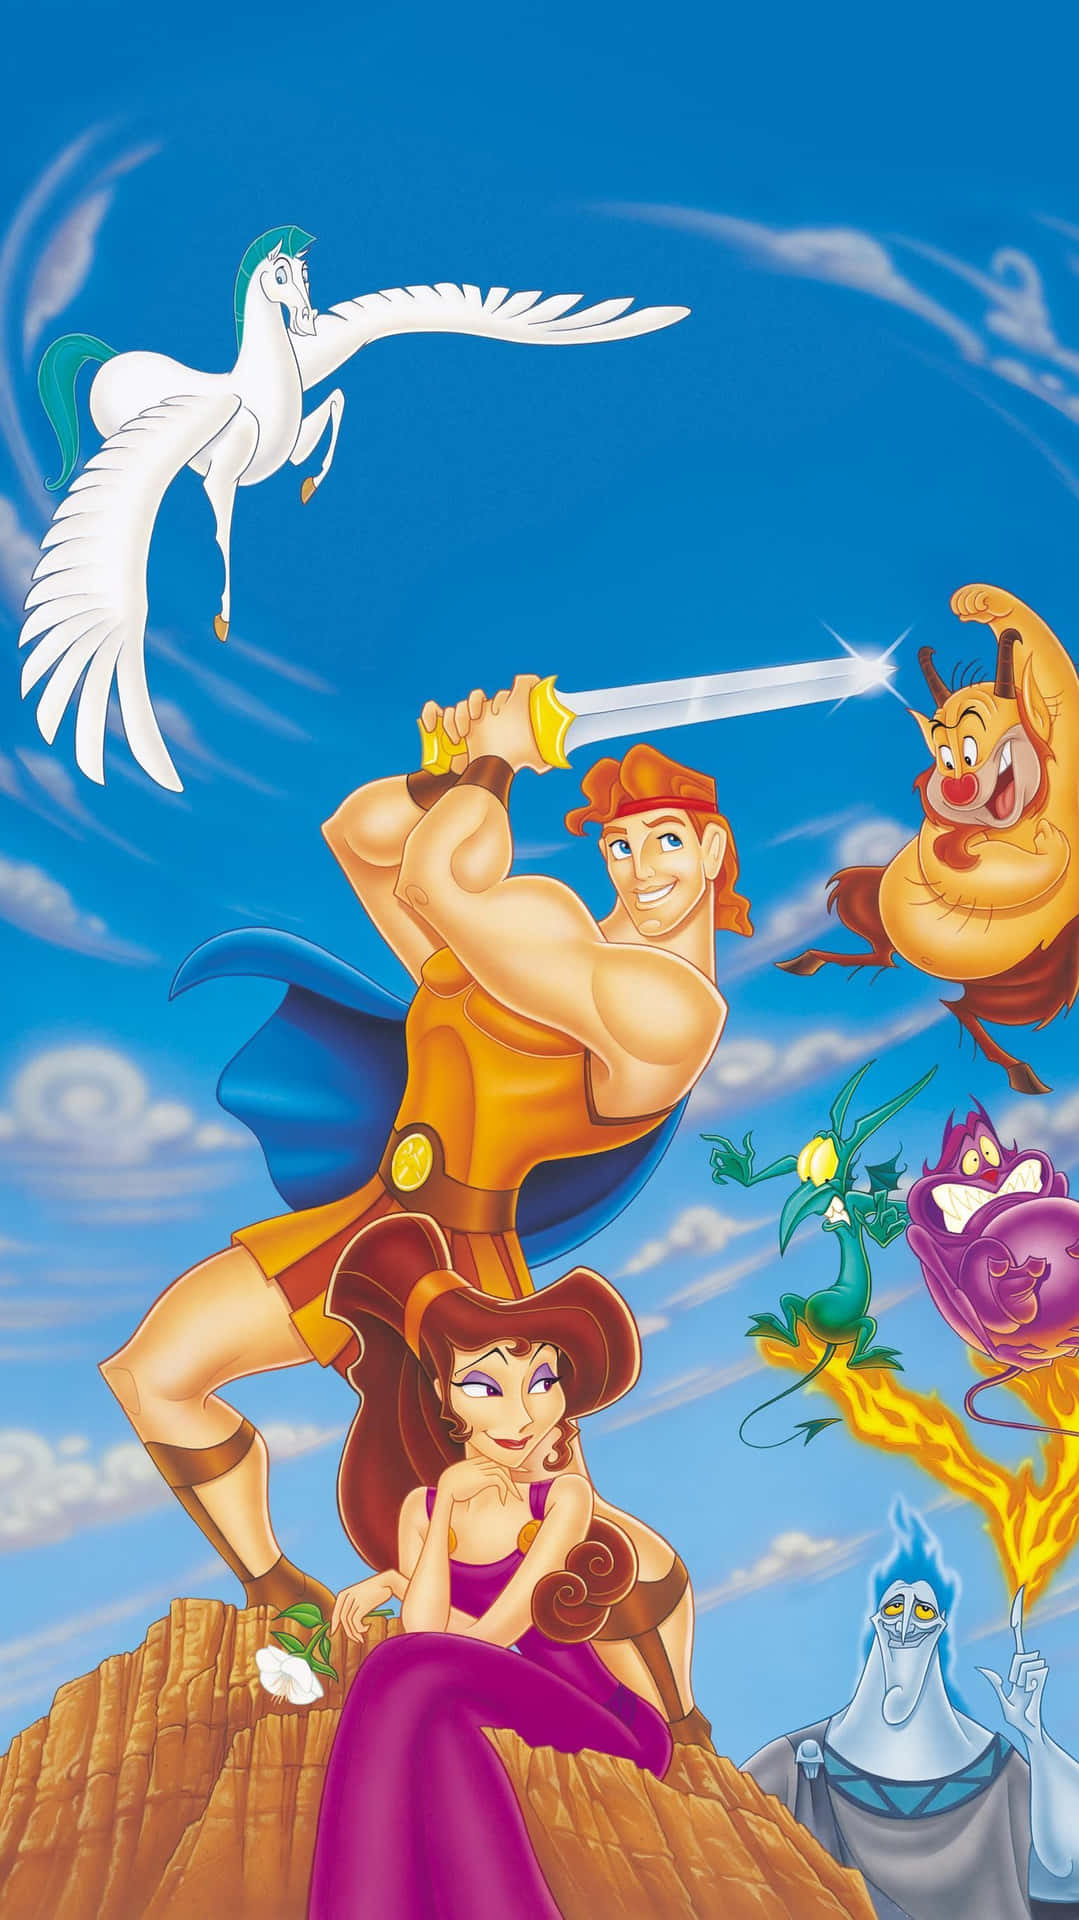 The He-man And The Mythical Beasts